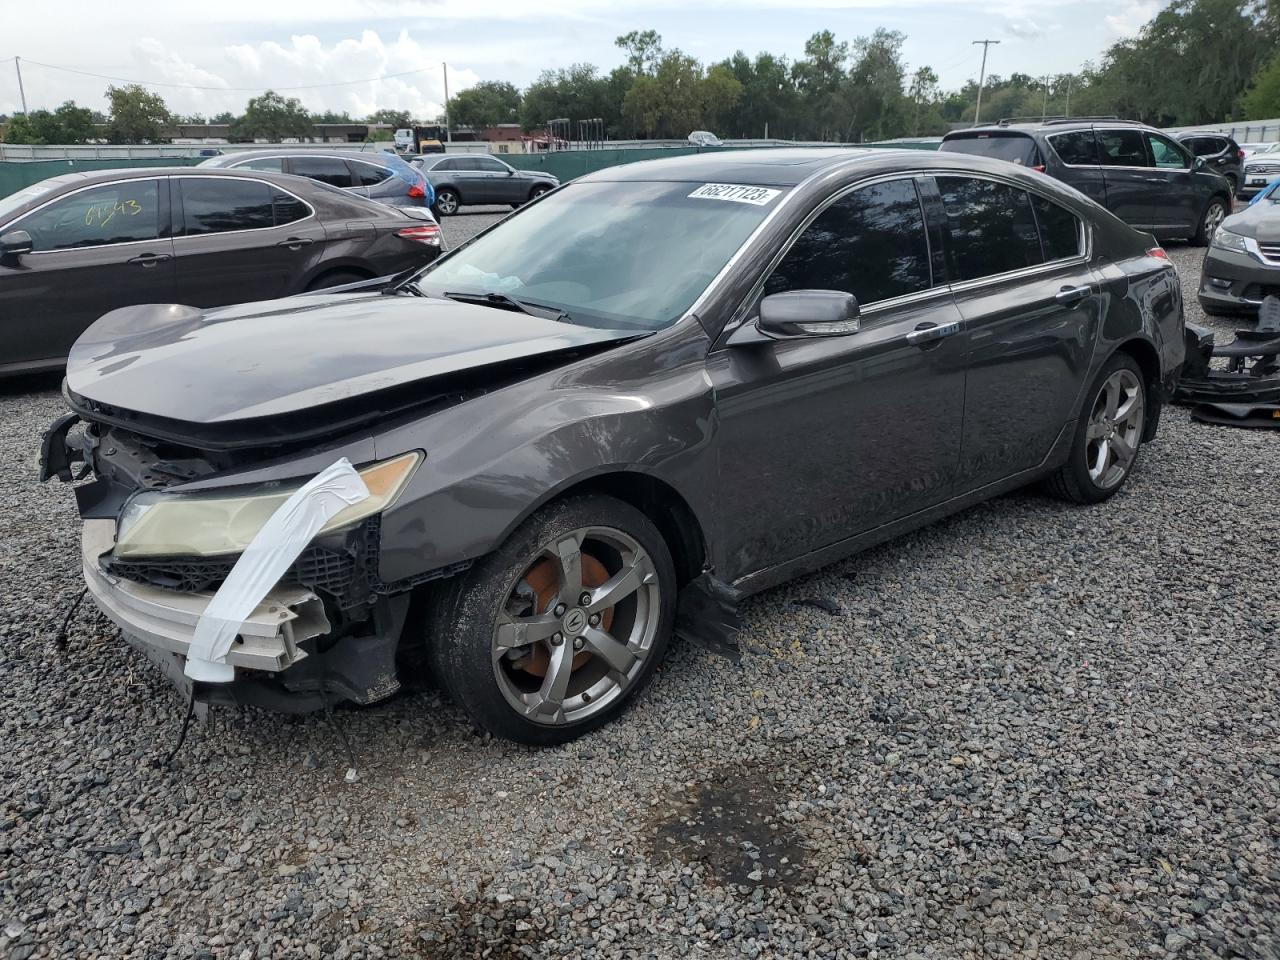 vin: 19UUA96559A002597 19UUA96559A002597 2009 acura tl 3700 for Sale in 33578 7610, Fl - Tampa South, Riverview, USA